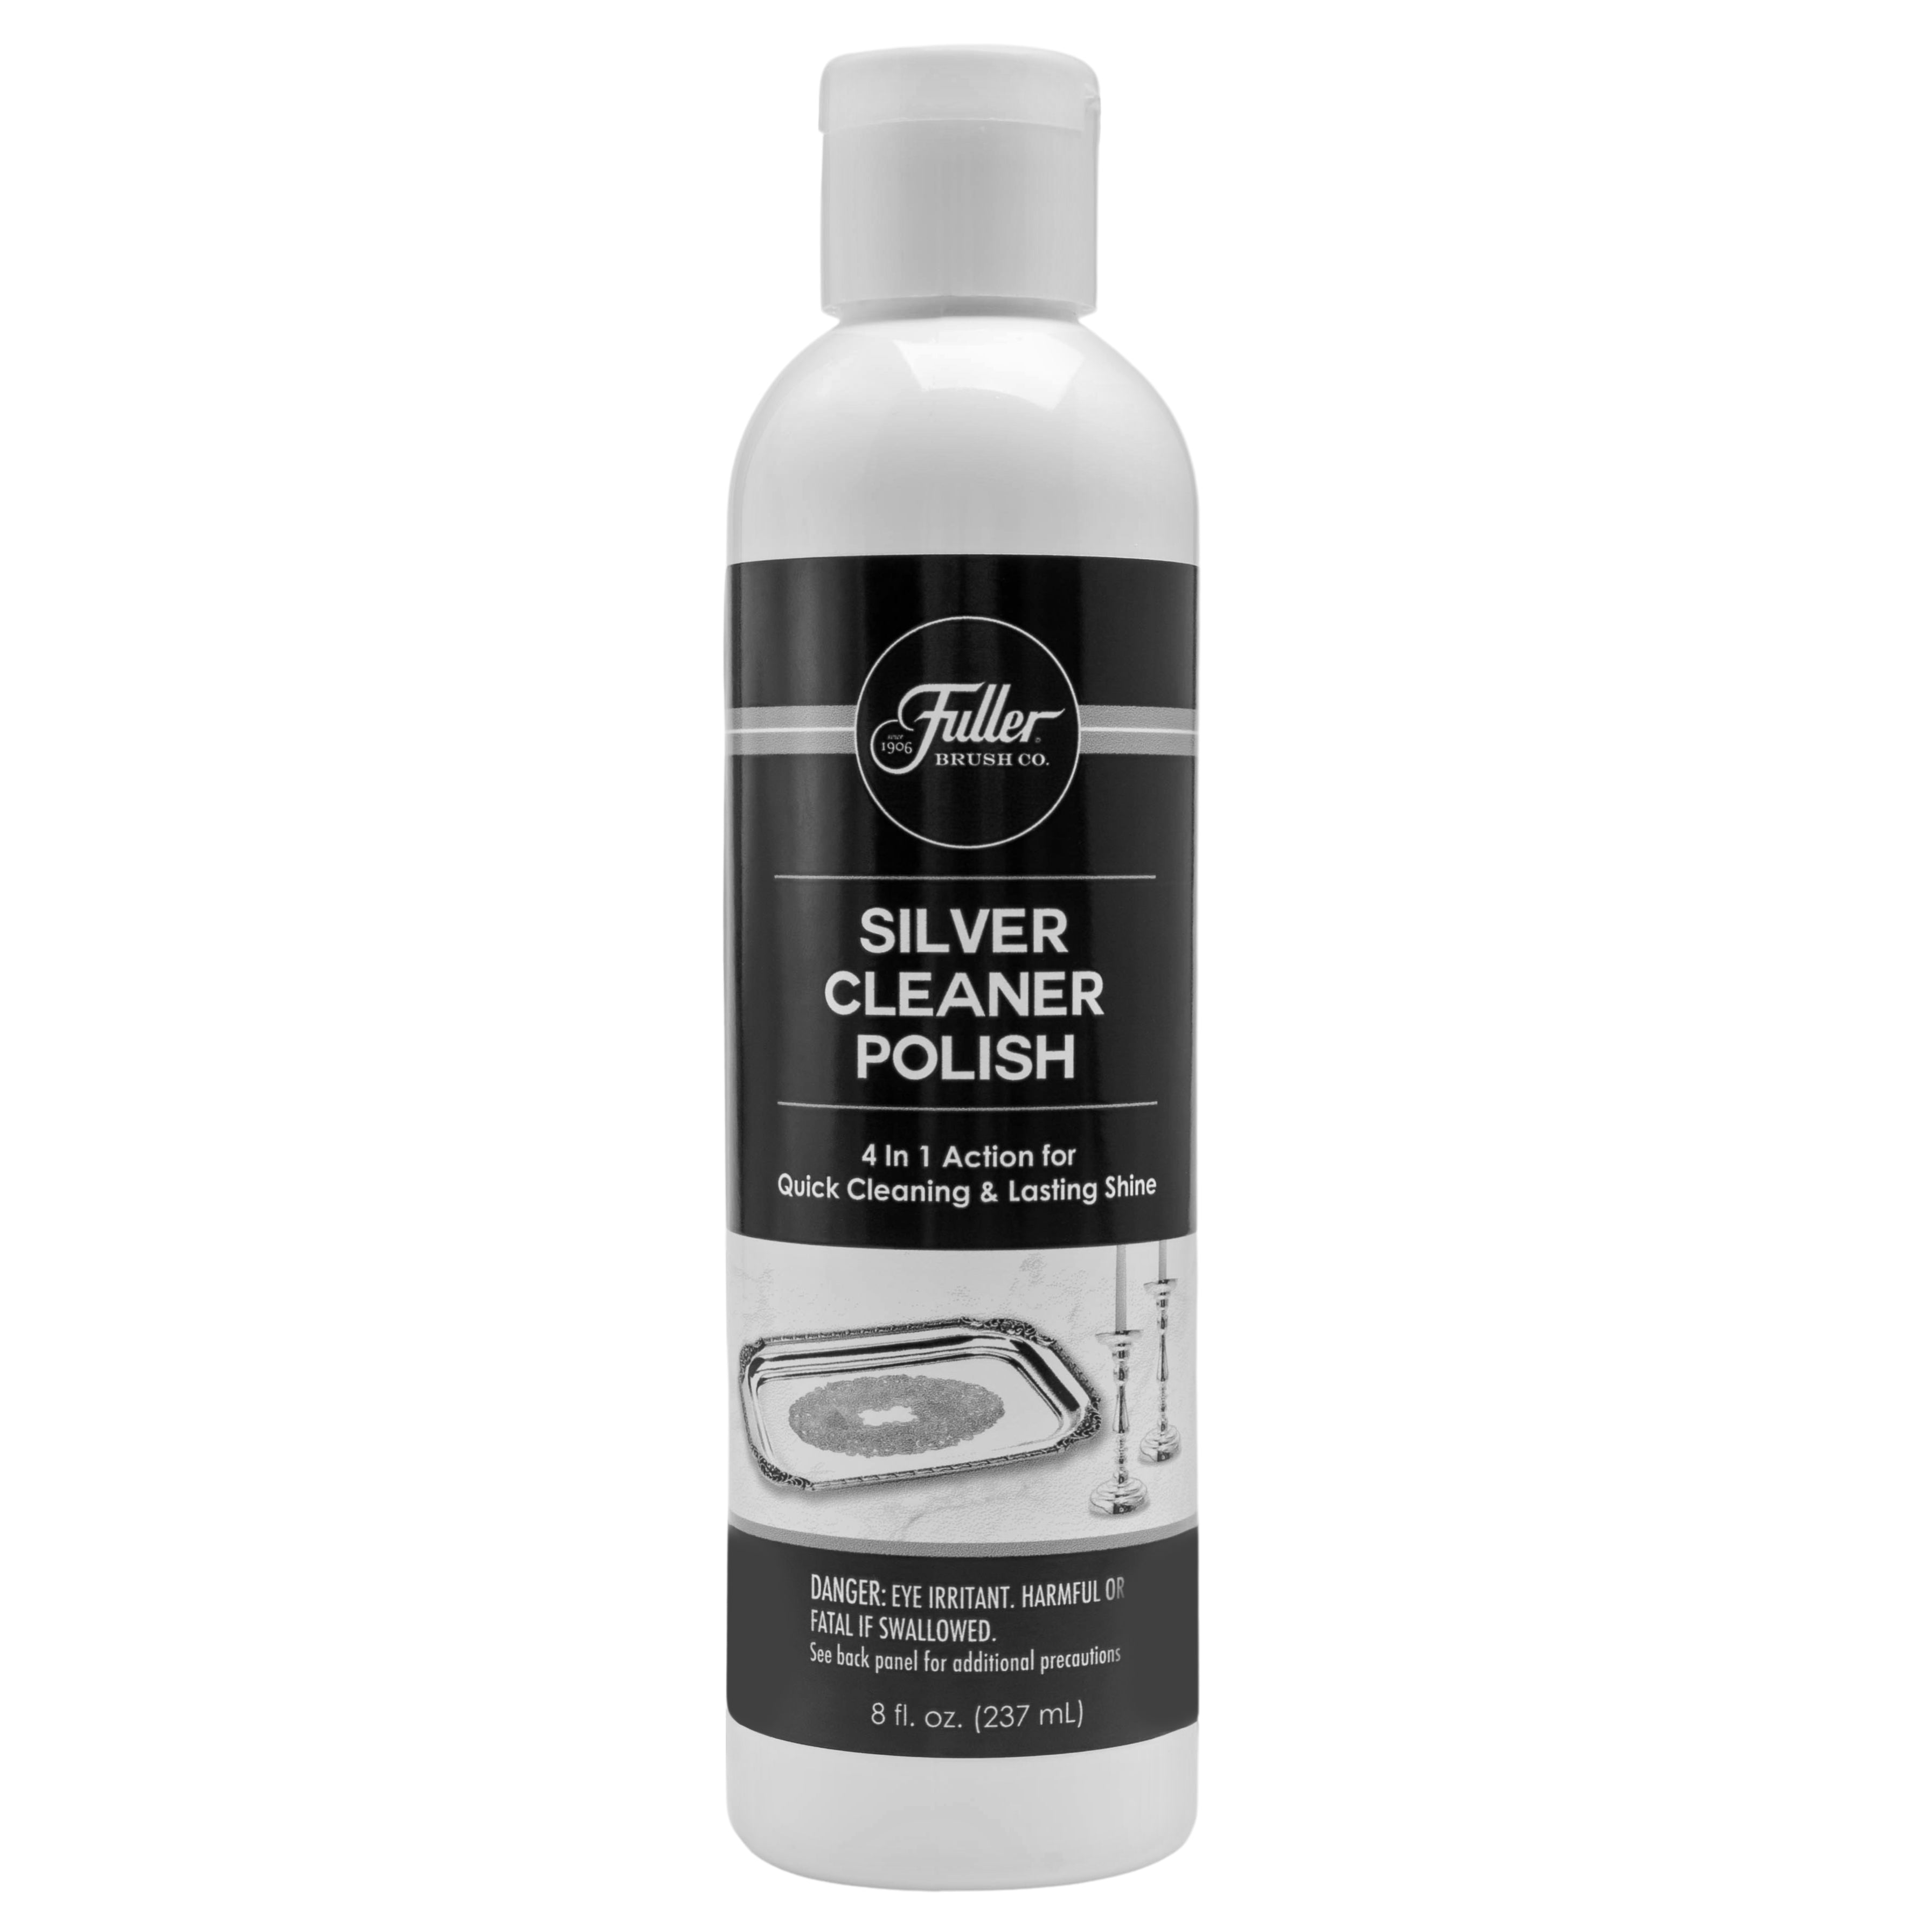 Silver Cleaner Polish 4 in 1 Cleaning Action  8 oz.